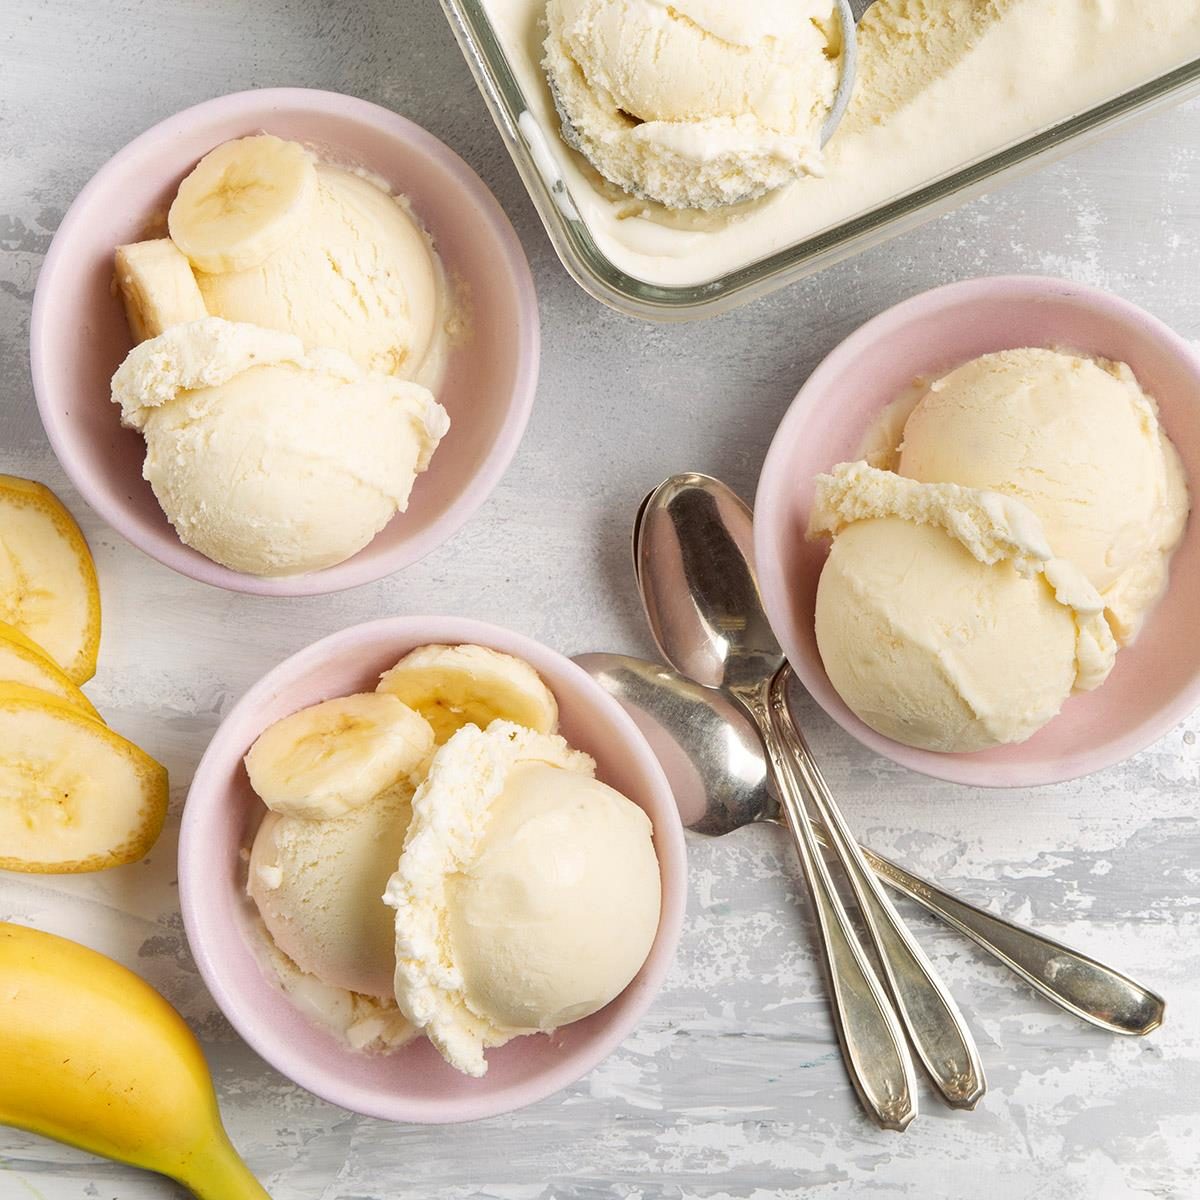 How to Make Professional Ice Cream at Home, According to Experts